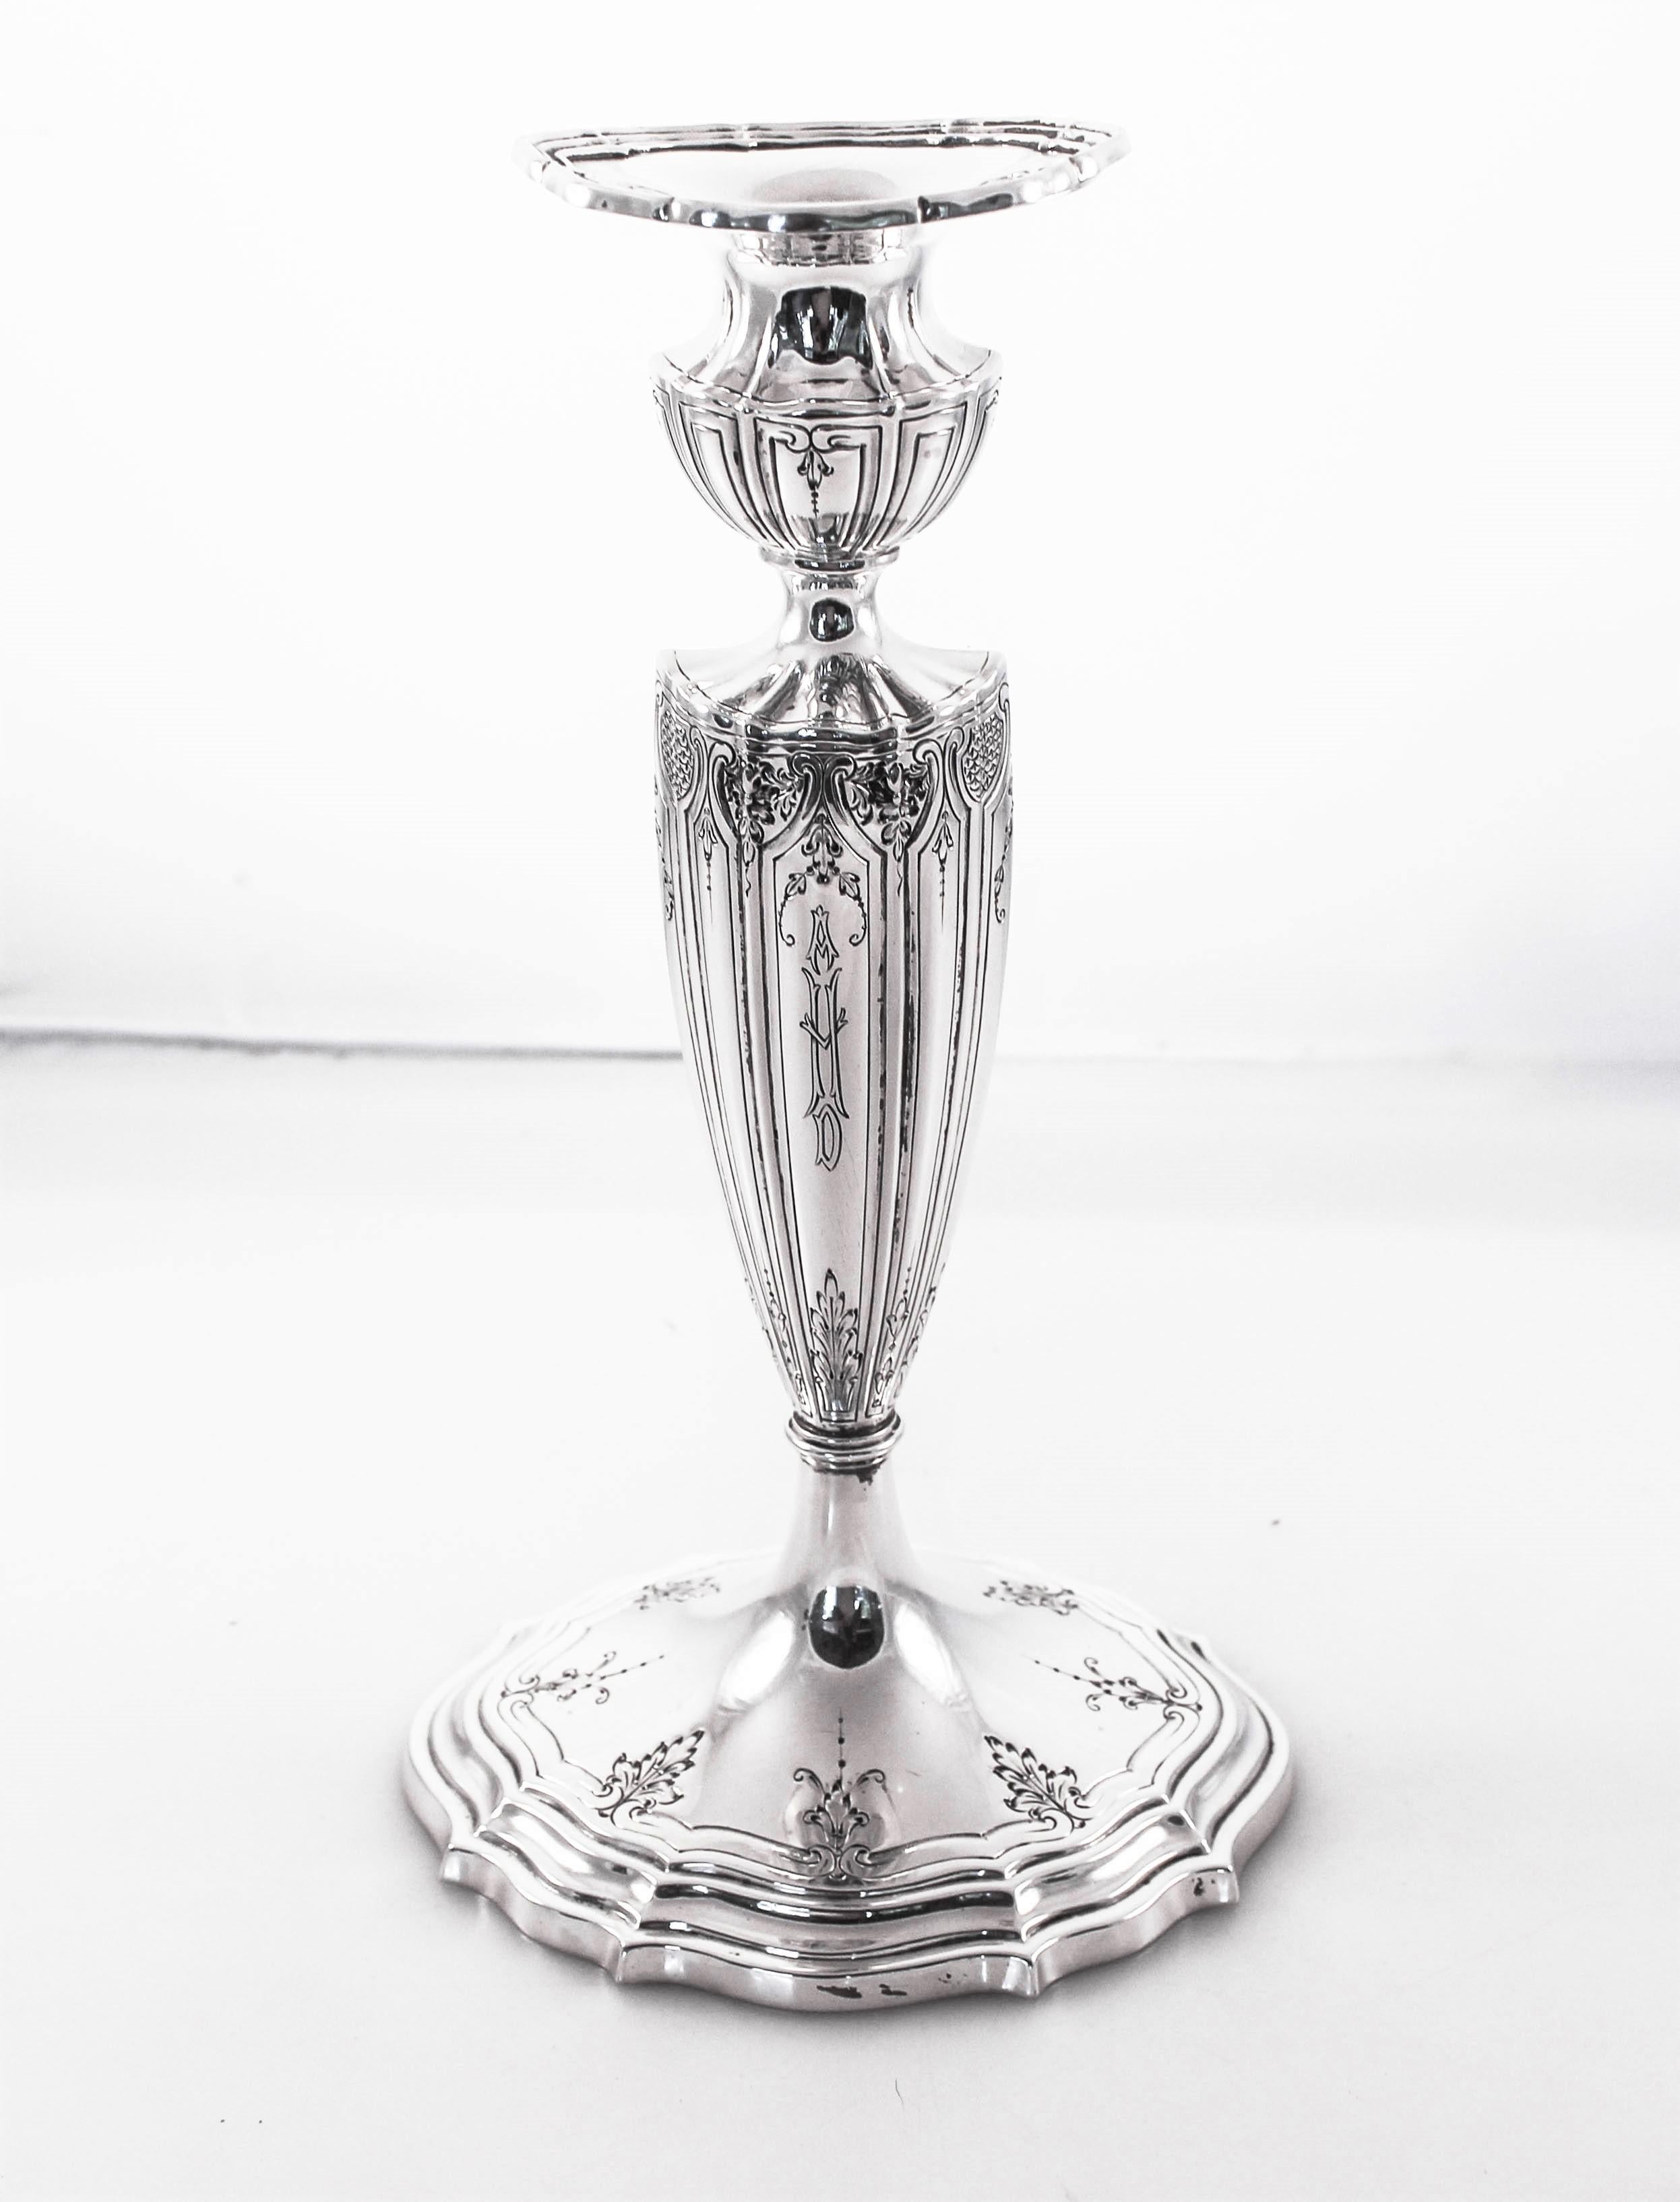 We are so proud to offer this pair of sterling silver candlesticks by William Durgin of Concord, New Hampshire. Known for their exceptional sterling patterns and designs, these candlesticks are living proof that almost one hundred years later Durgin